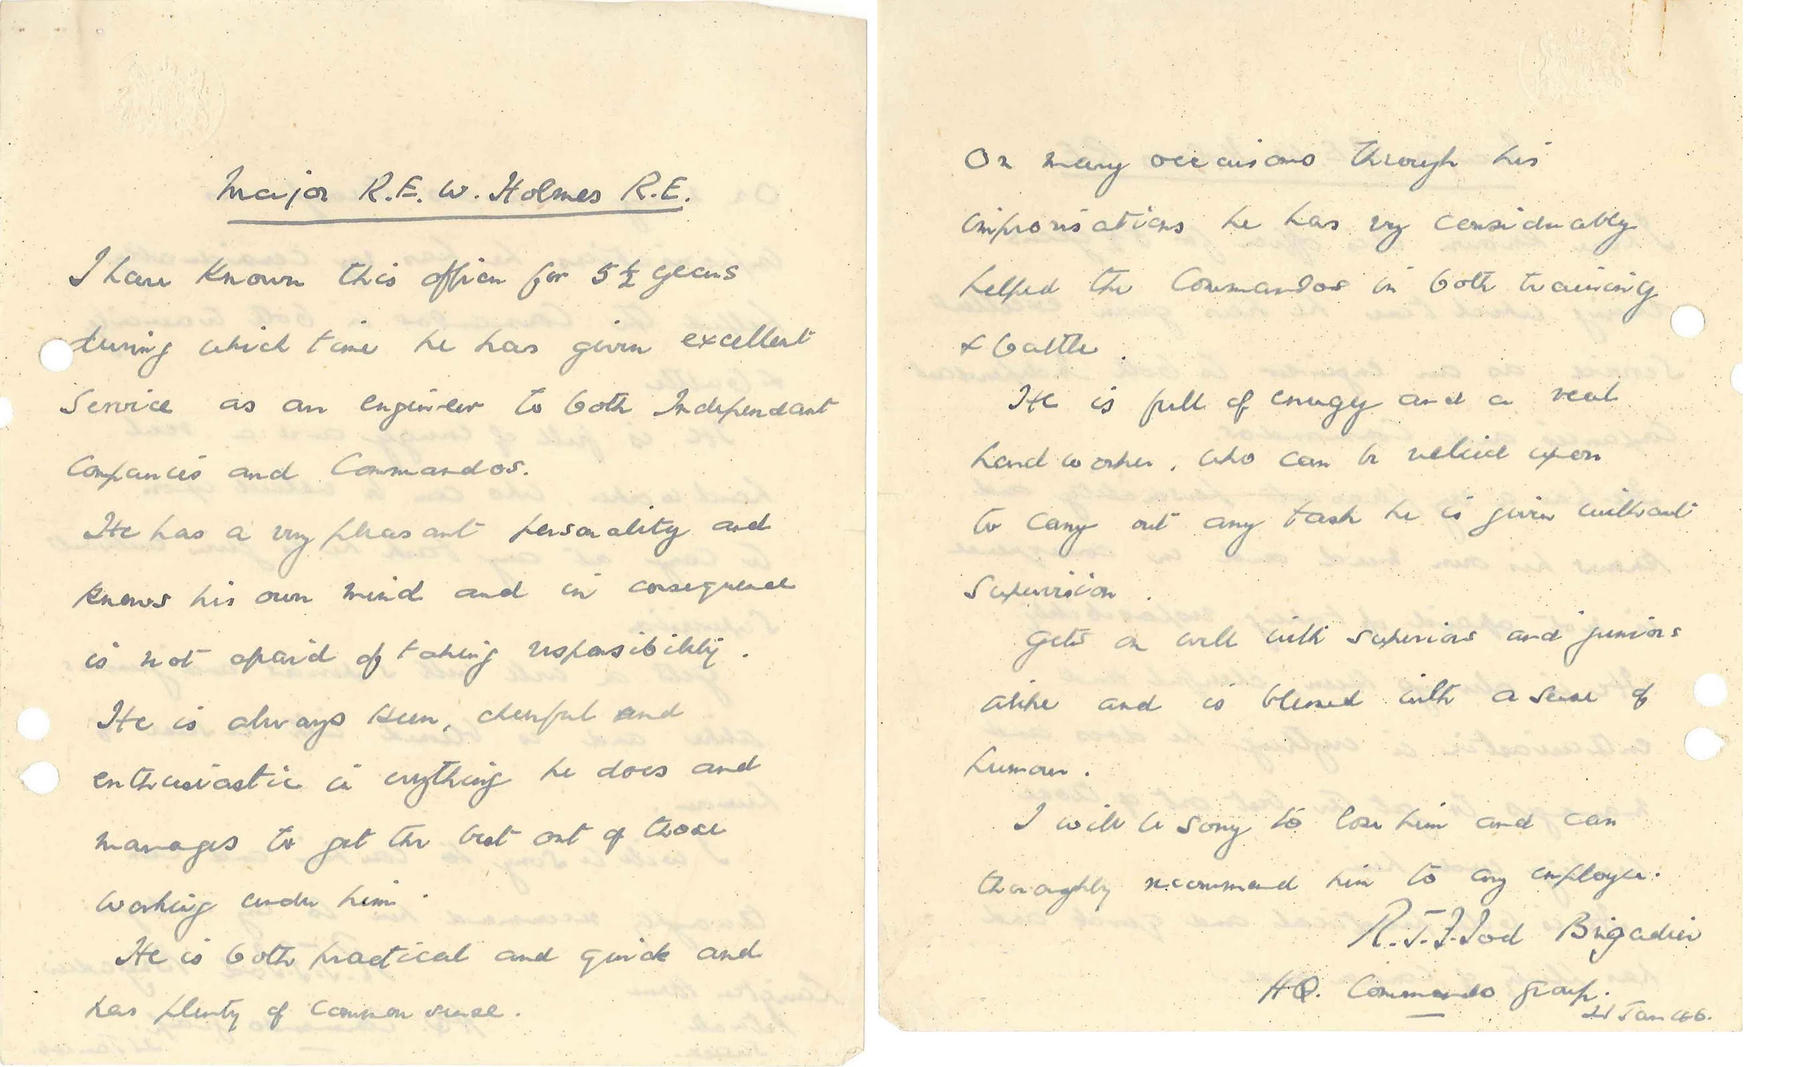 Letter of reference for Major Holmes from from Brigadier Tod